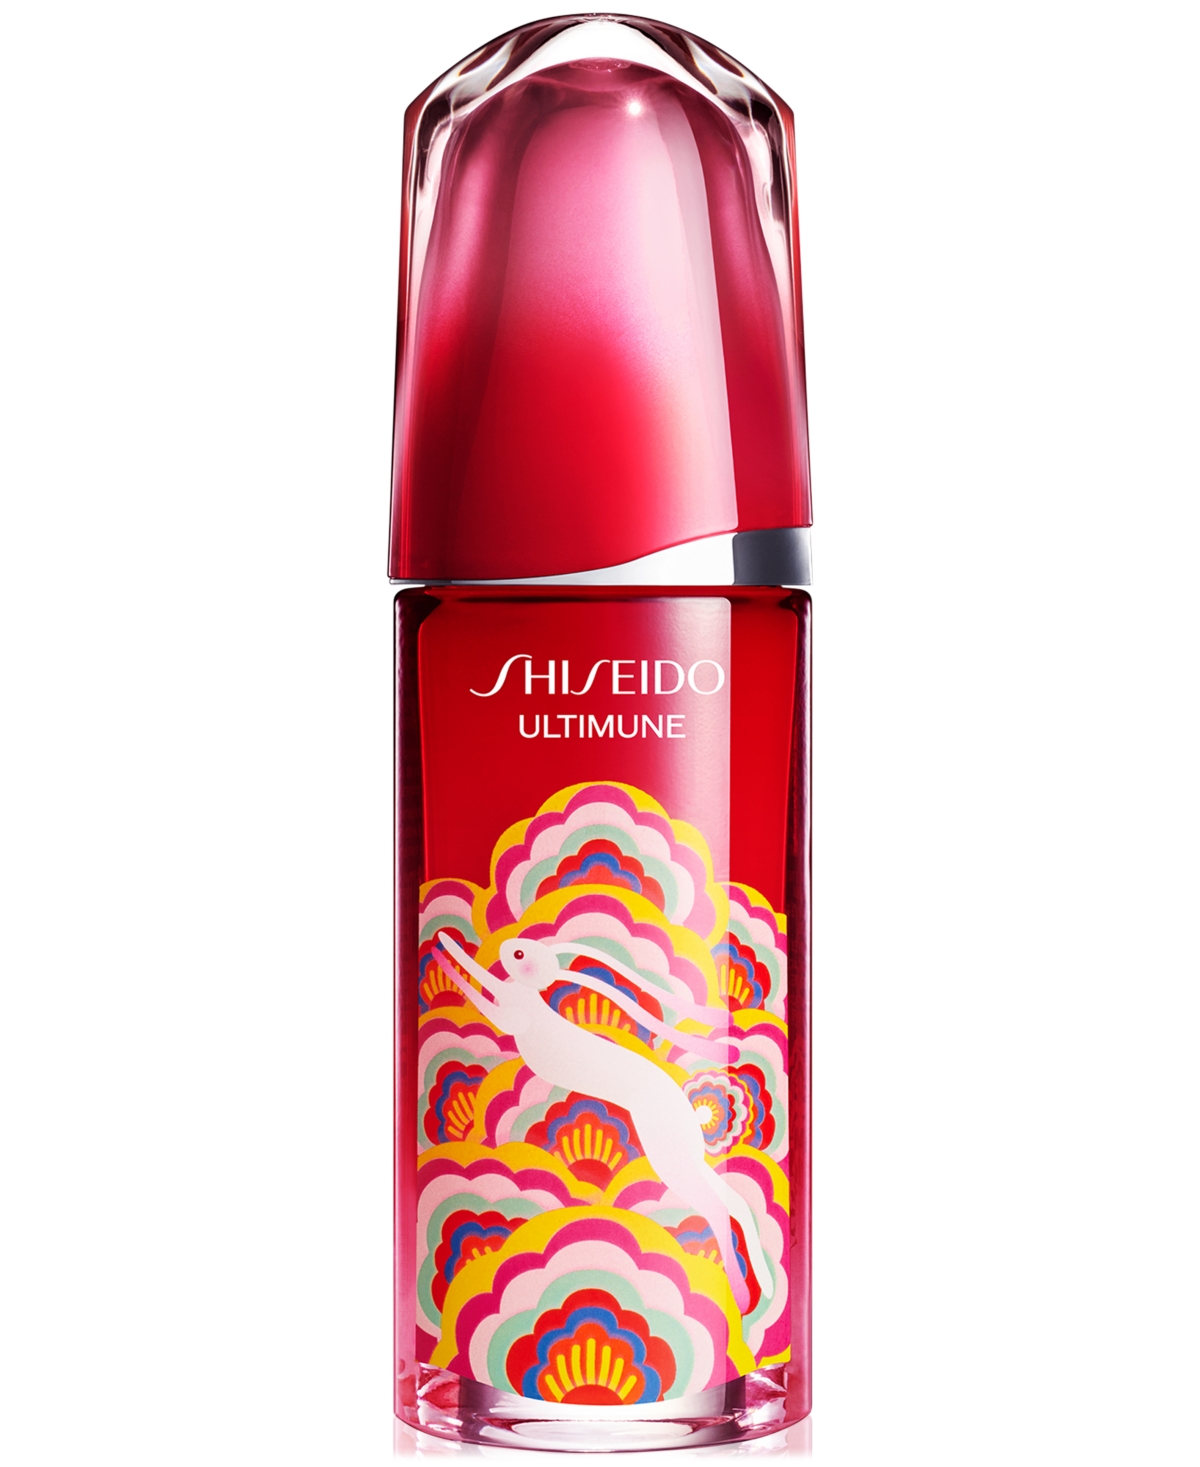 SHISEIDO LIMITED-EDITION LUNAR NEW YEAR ULTIMUNE POWER INFUSING CONCENTRATE, 75 ML